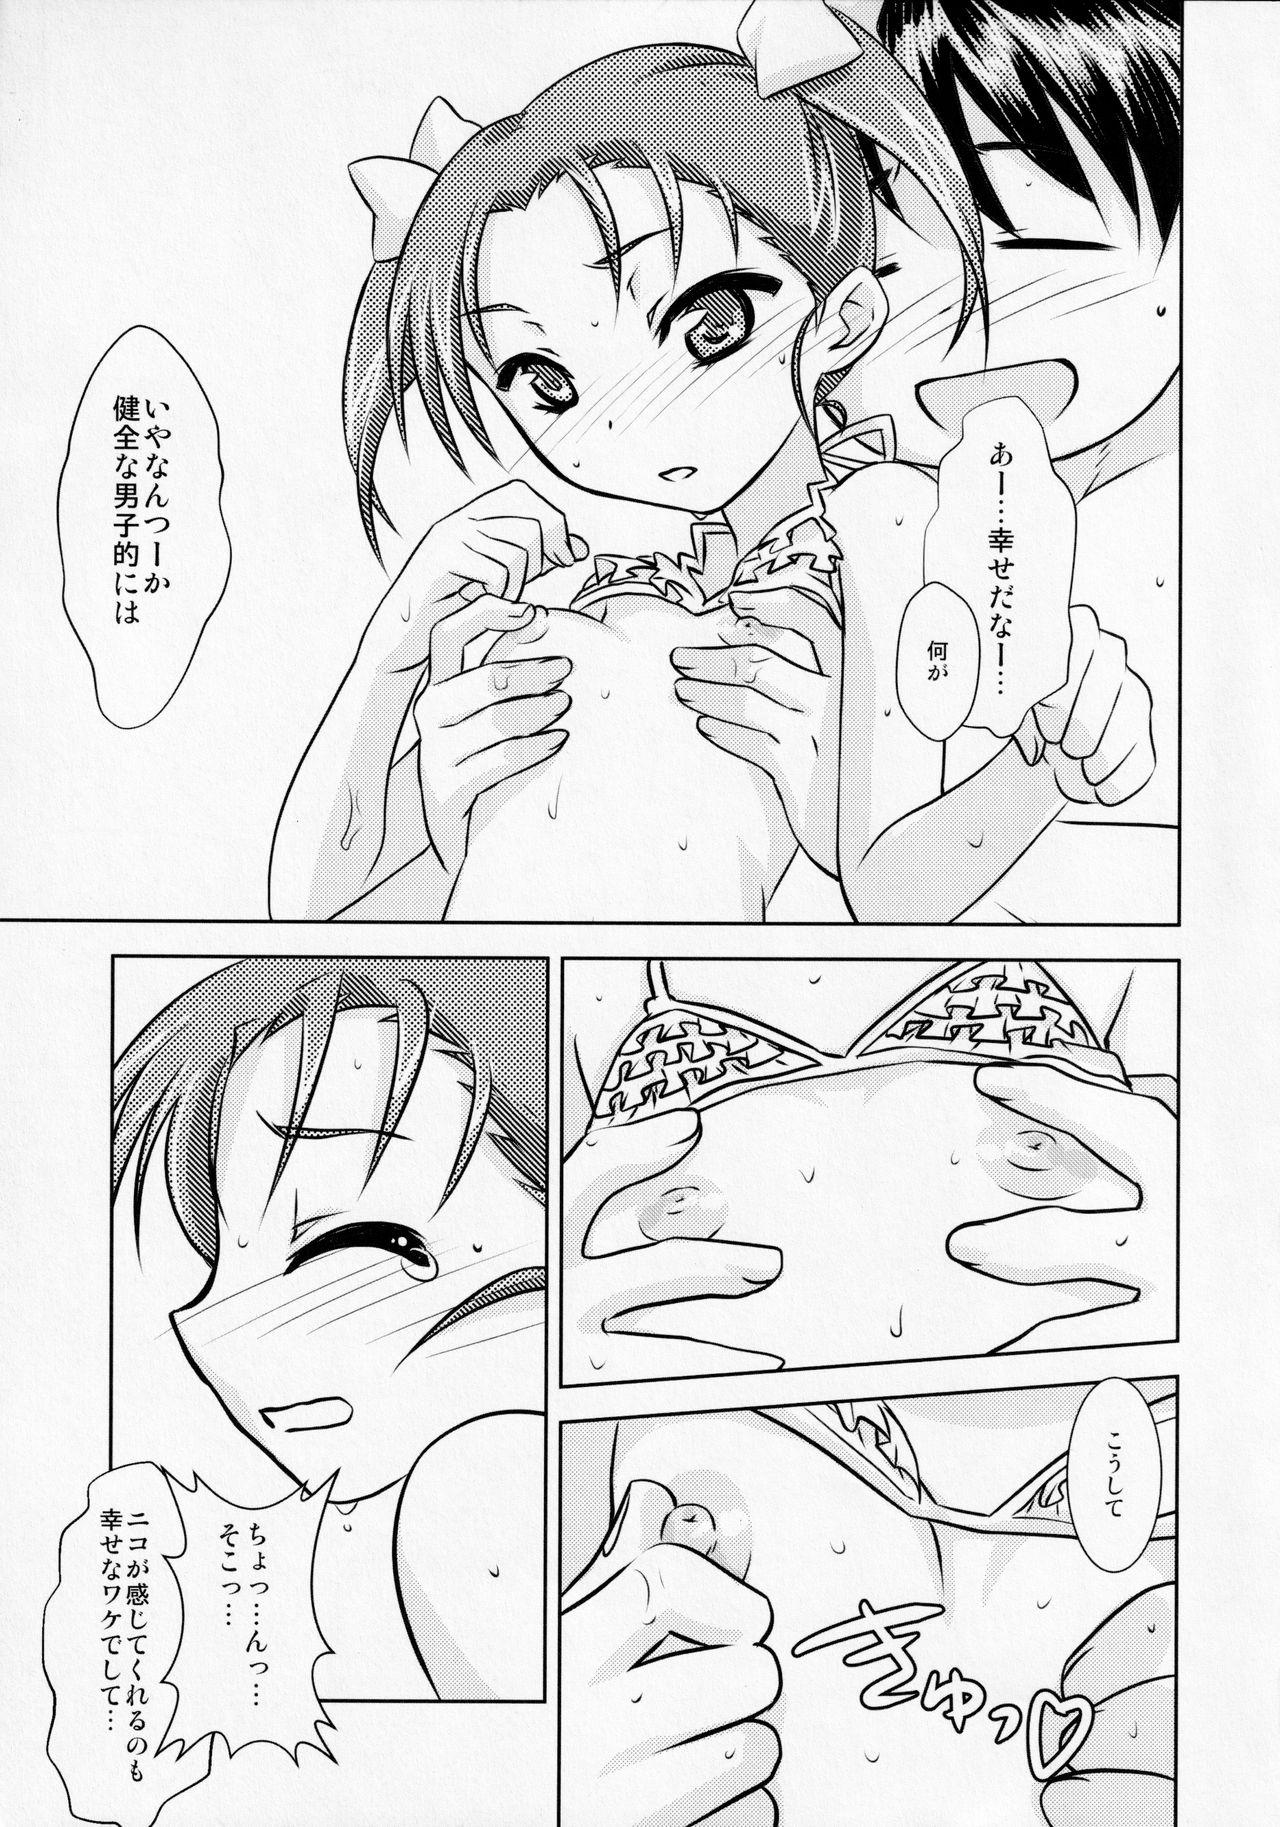 Flaquita Houkago Link 3 - Accel world Sex - Page 6